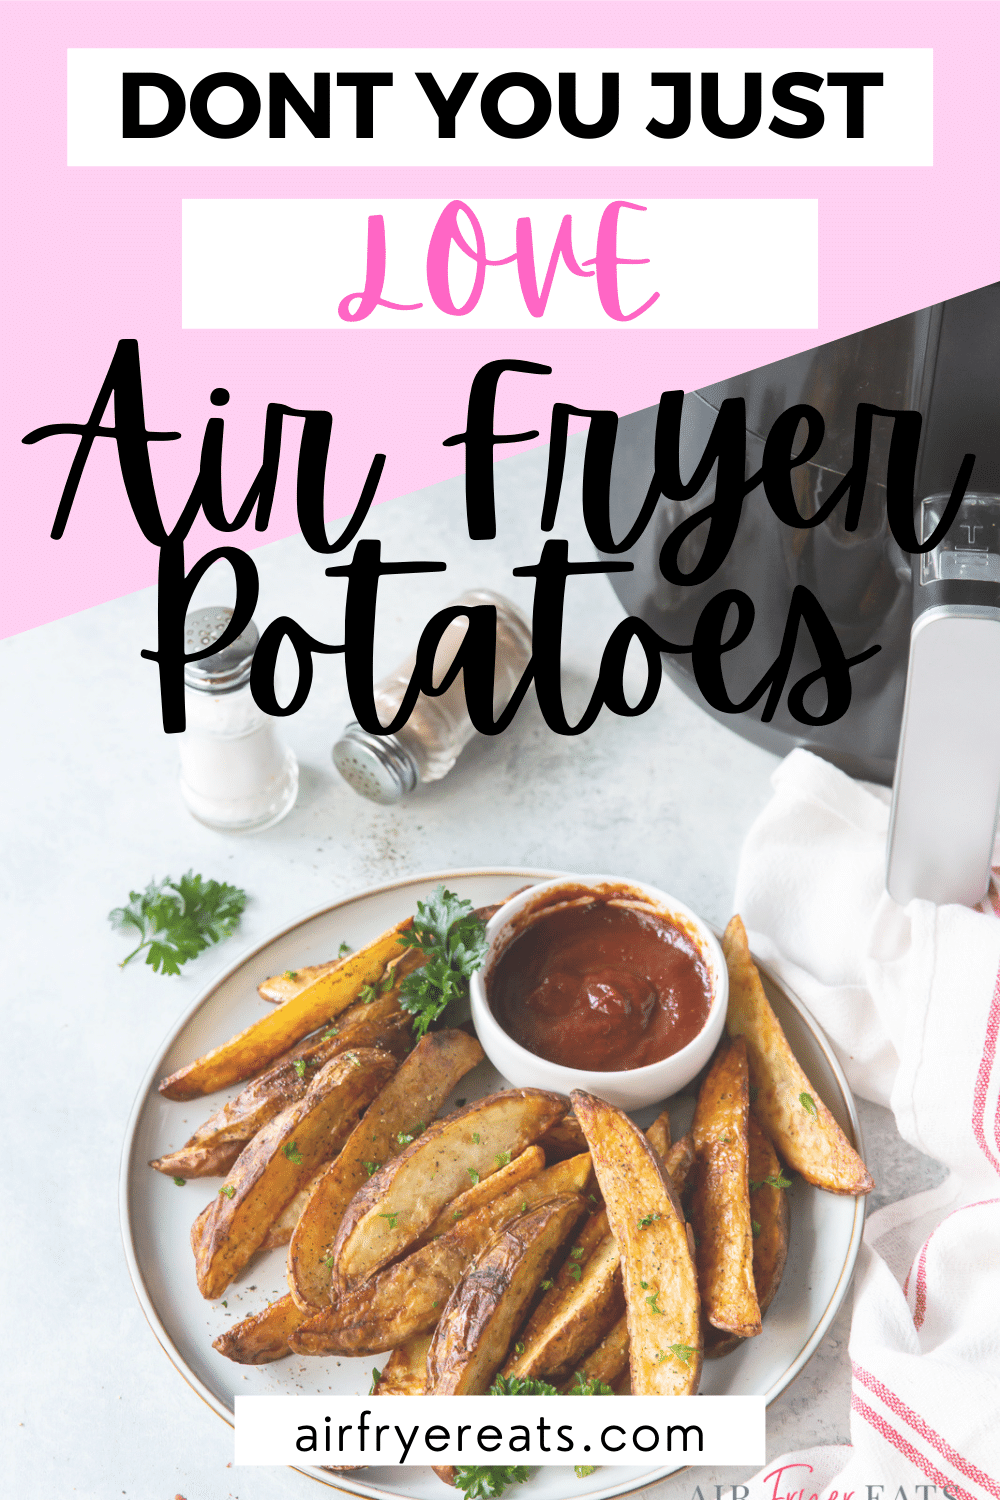 Air Fried Potato Wedges are a quick and easy side dish. They are crispy on the outside, yet tender on the insider. These air fried potato wedges are family friendly and perfect for a side dish or late night snacking! | Air Fryer Potato Wedges | Air Fried Potato Wedges | Air Fryer Potatoes via @vegetarianmamma